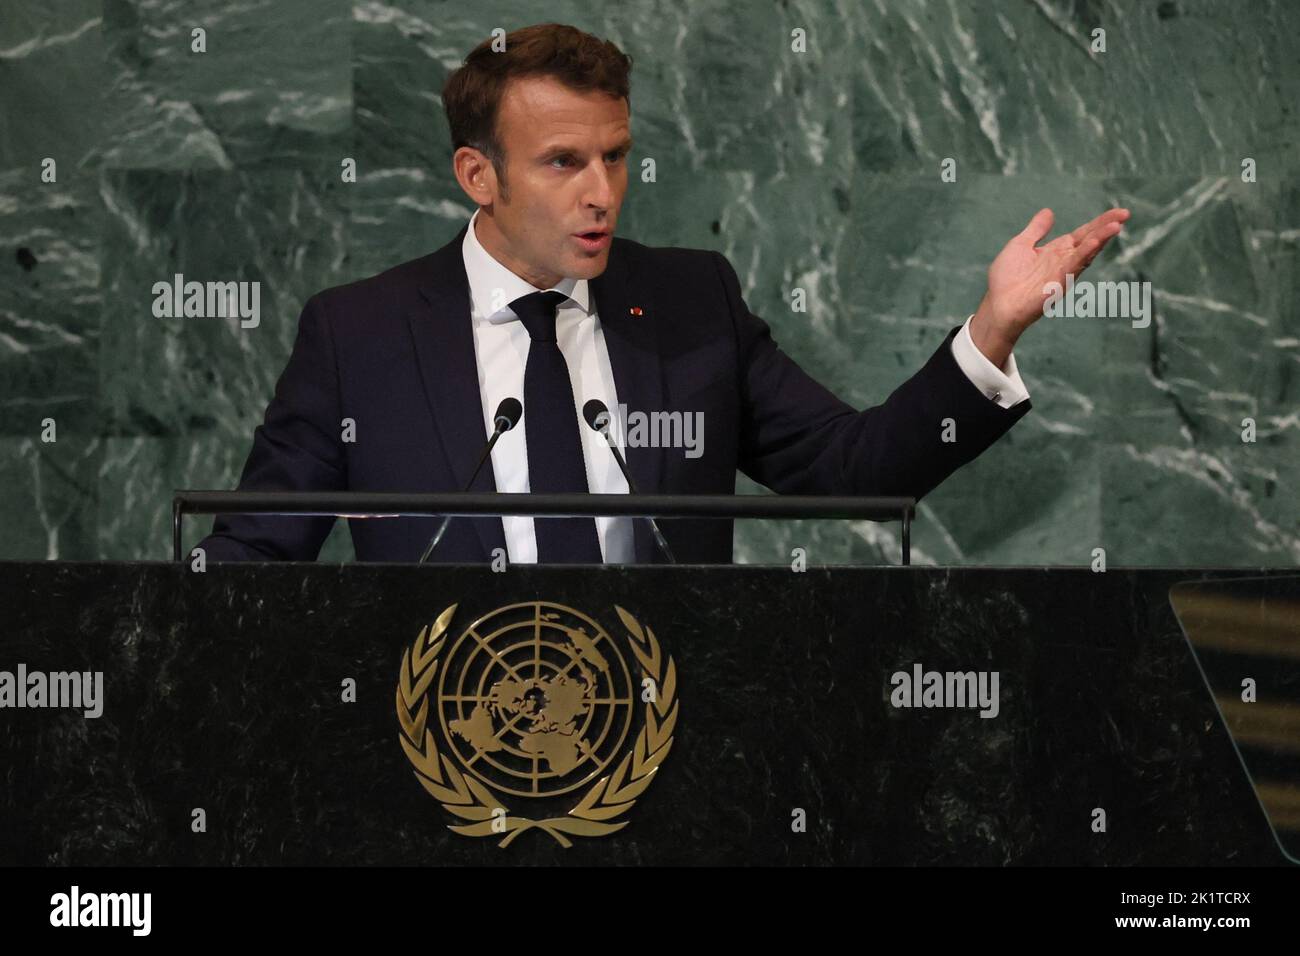 France's President Emmanuel Macron addresses the 77th Session of the United Nations General Assembly at U.N. Headquarters in New York City, U.S., September 20, 2022. REUTERS/Brendan McDermid Stock Photo